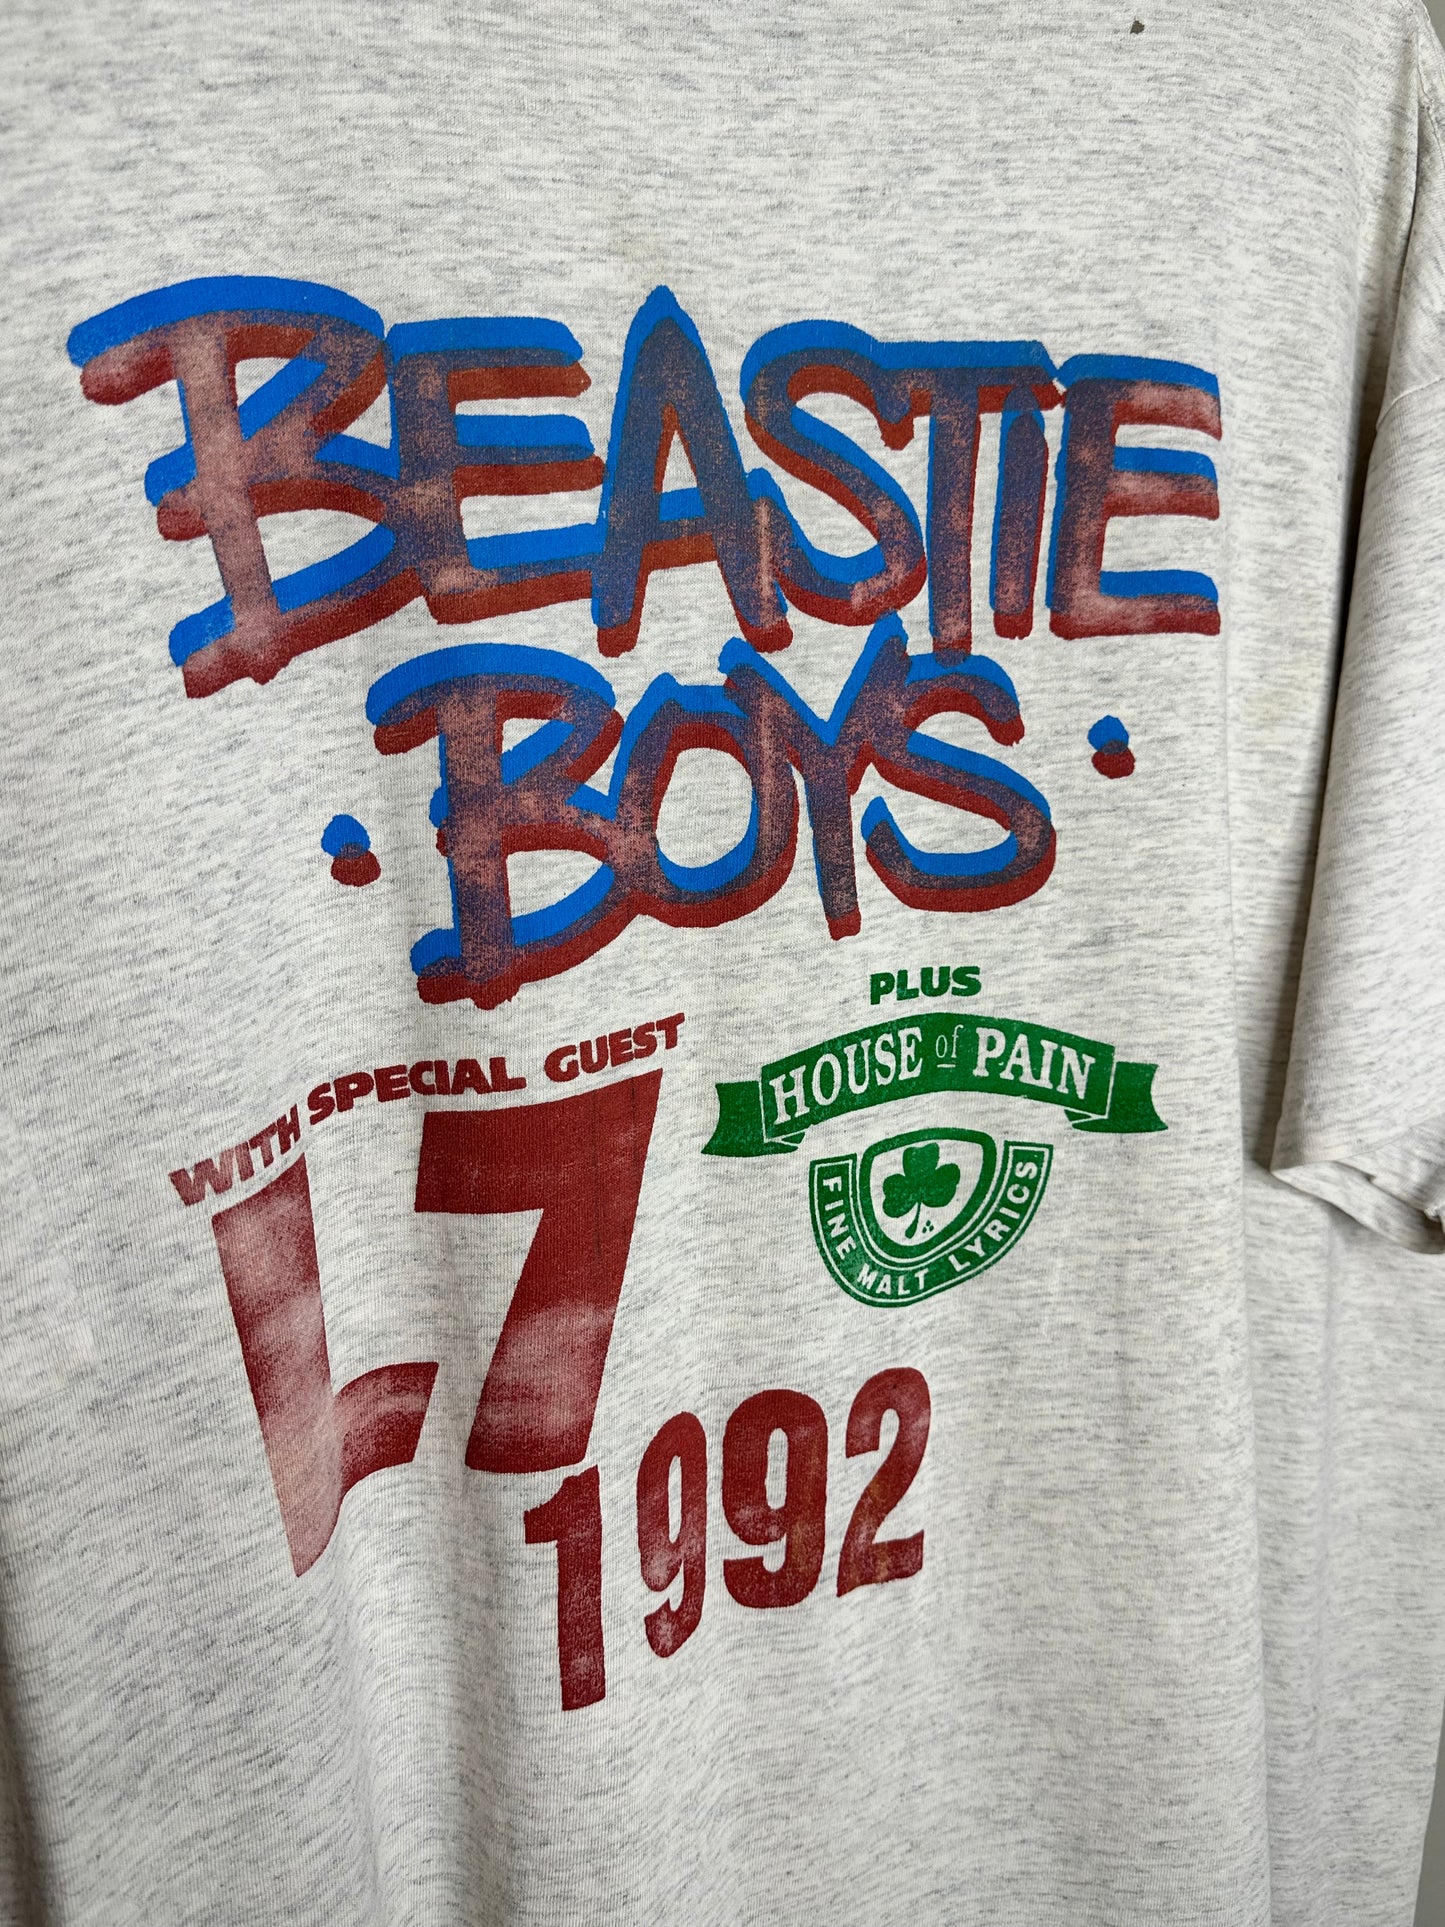 Vintage 1992 Beastie Boys T-Shirt XL (with L7 and House of Pain)